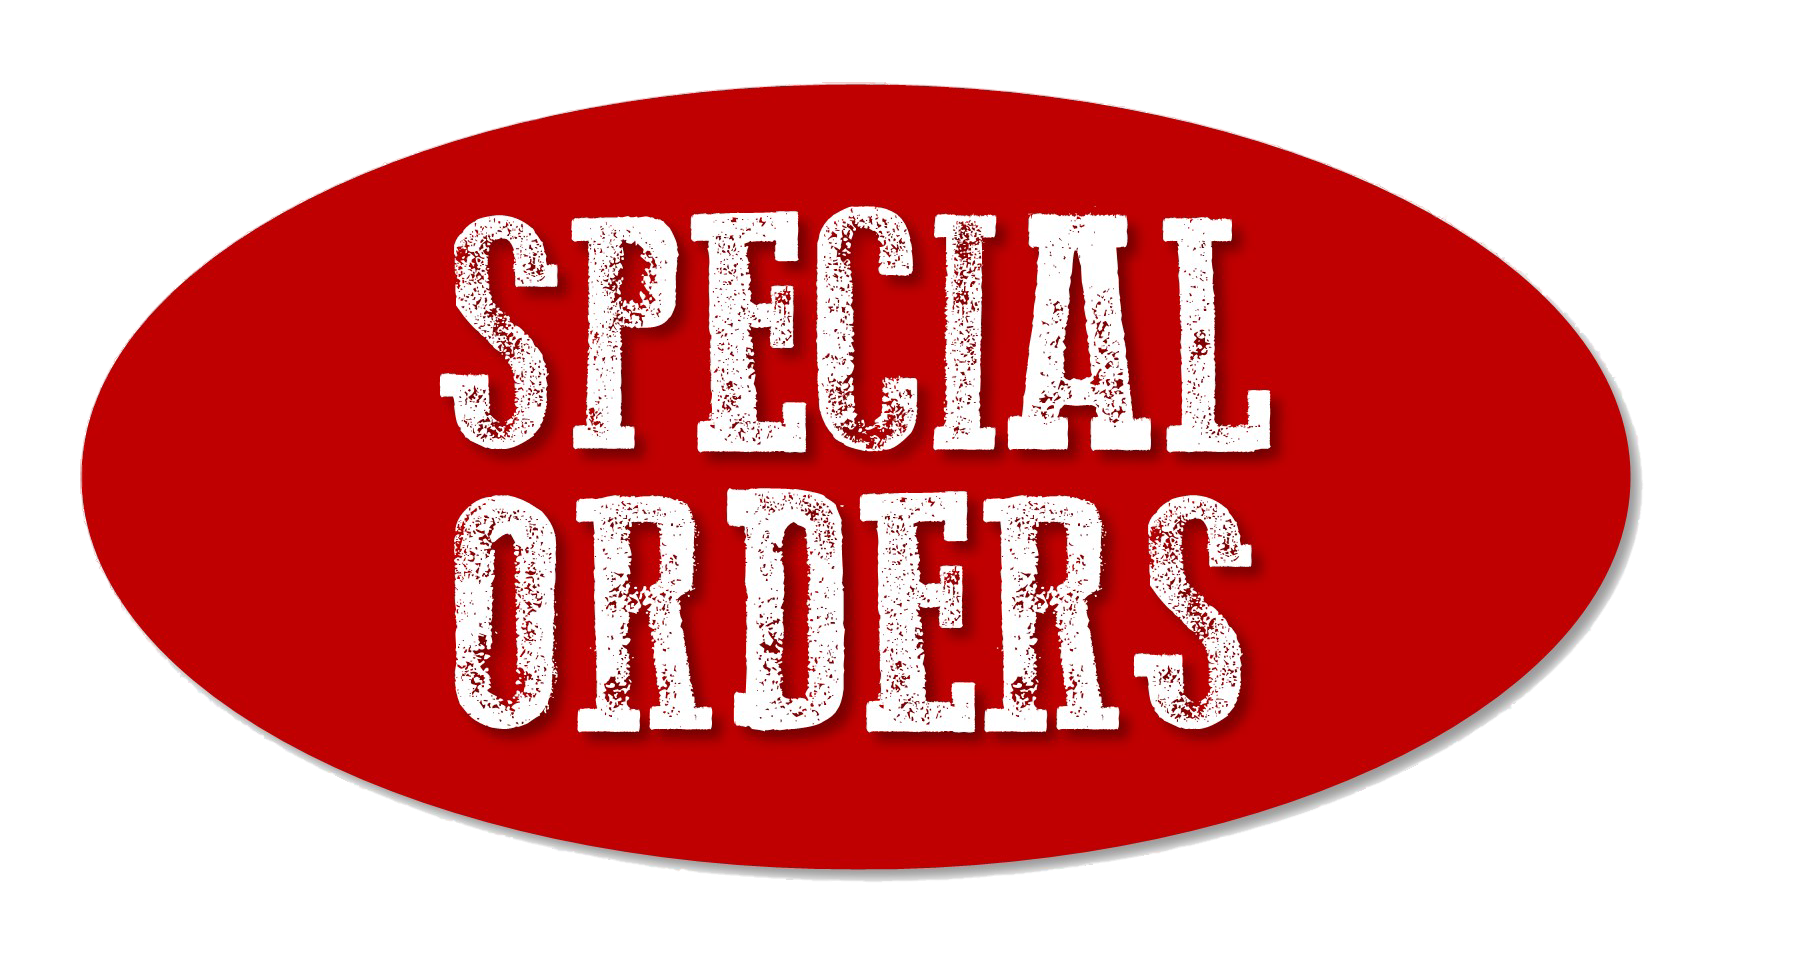 Special. Order картинка. Special order. Oroer. Special order logo.